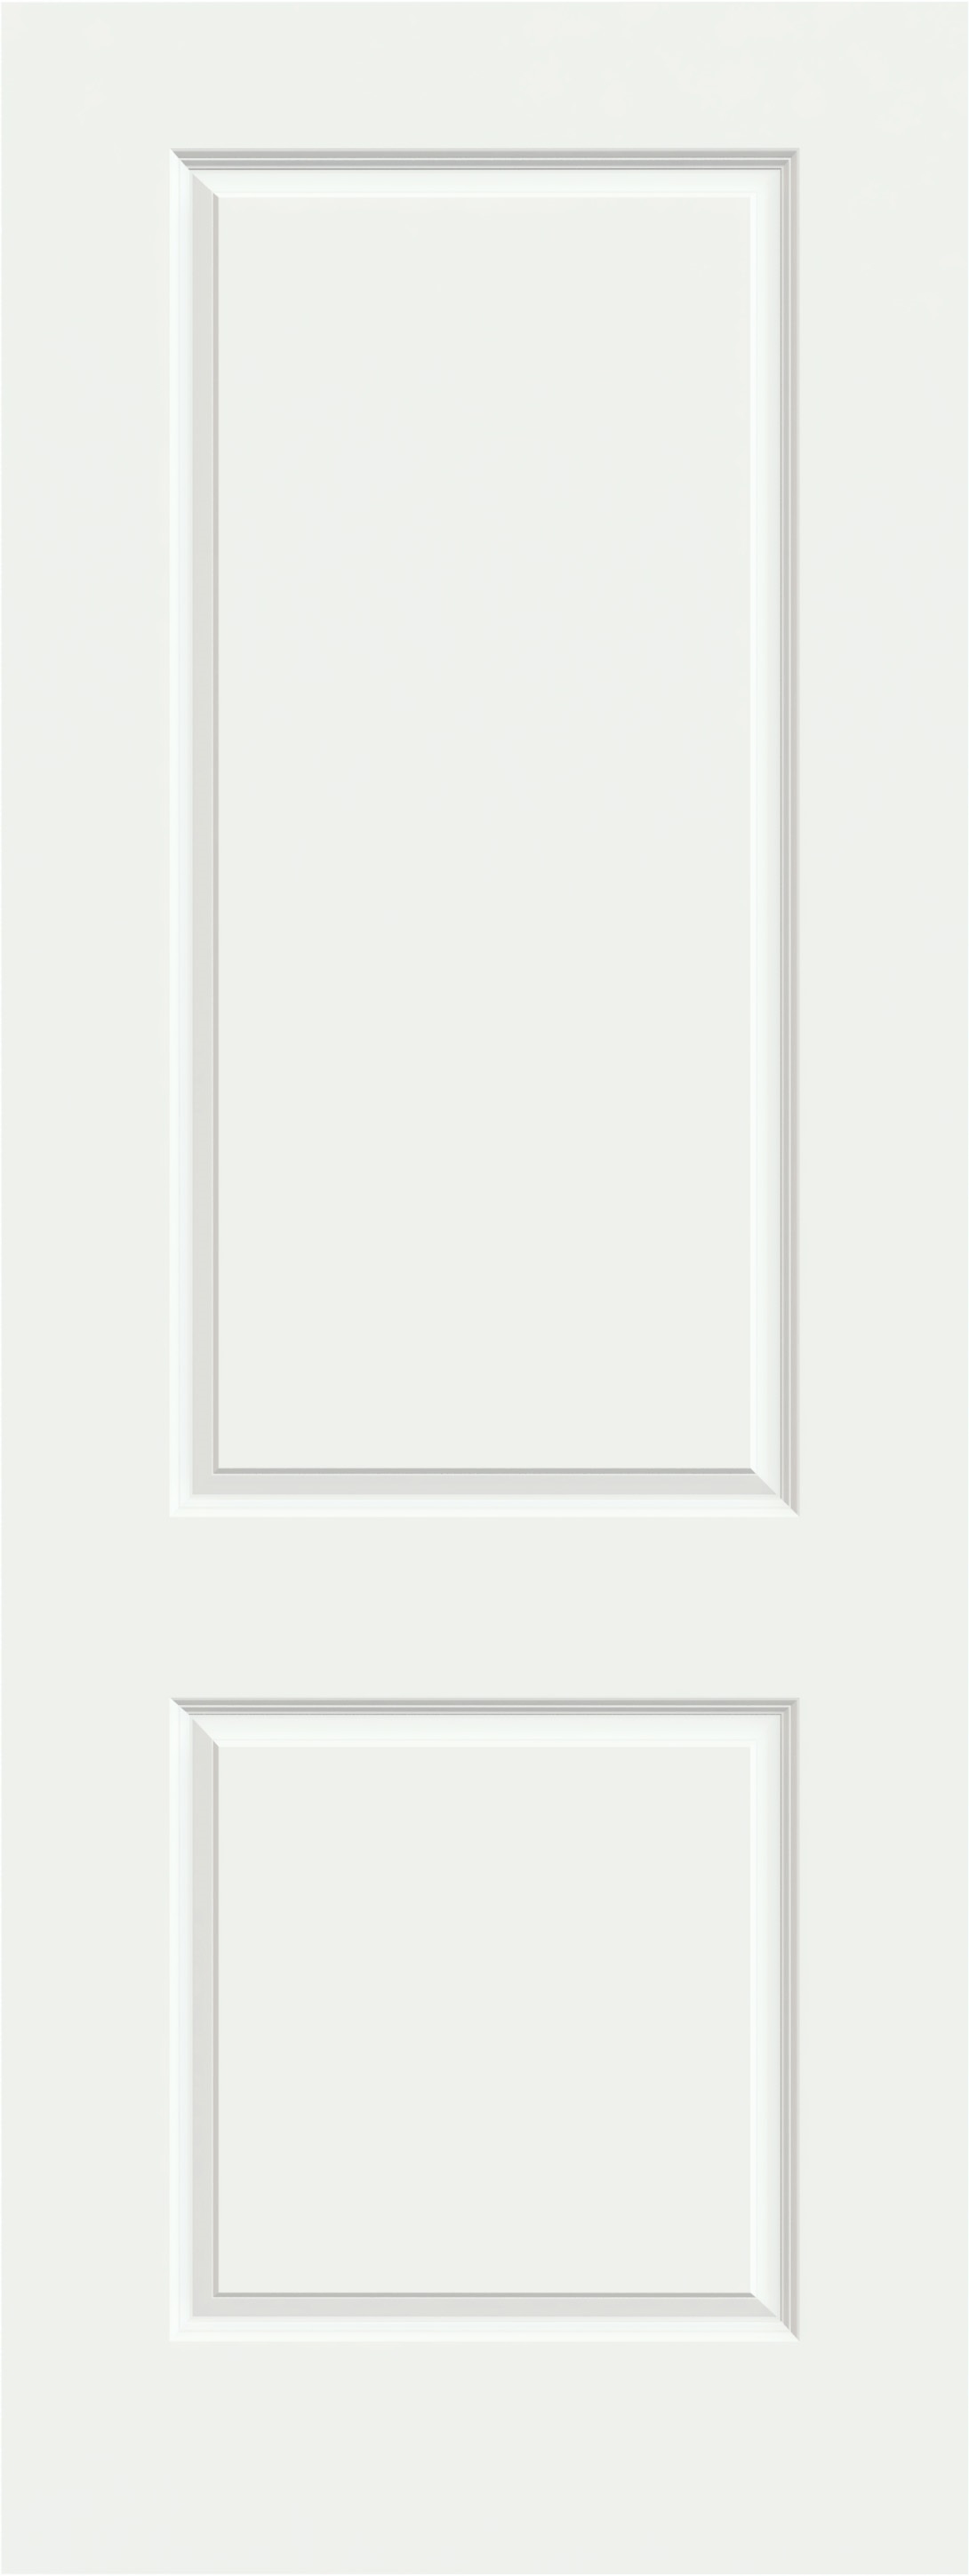 30 in x 96 in, Carrara, 2 Panel Square, Primed , Smooth, Hollow Core, Interior Single Prehung Door, Right Hand, Black Hinges